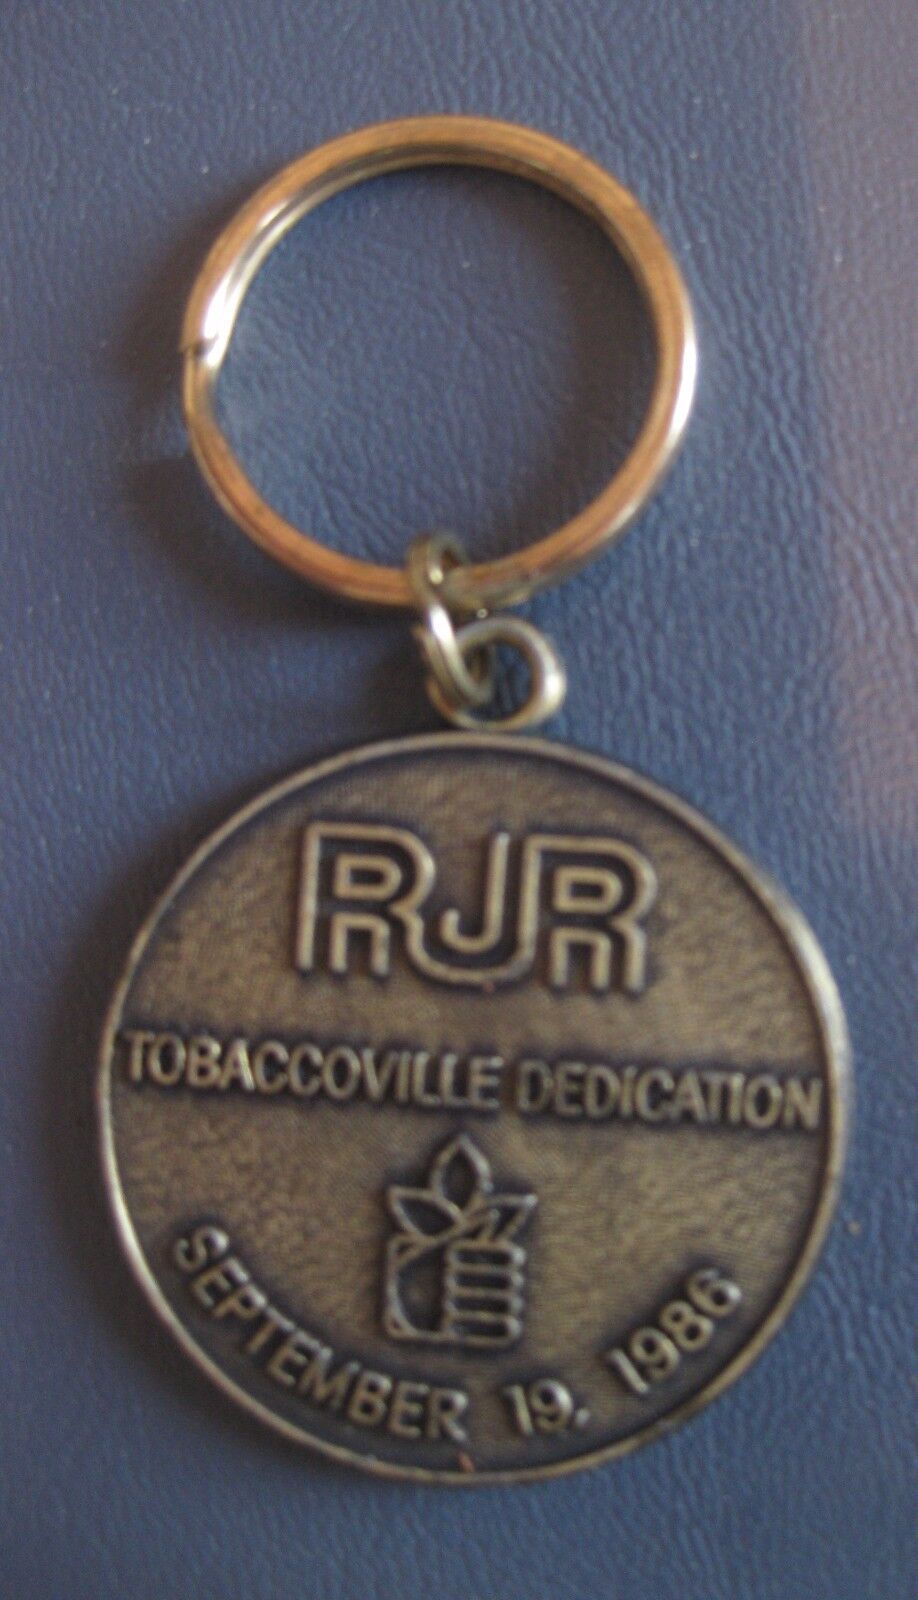 R.J. REYNOLDS TOBACCOVILLE DEDICATION KEYCHAIN SEPTEMBER 19, 1986 NEW IN PACKAGE